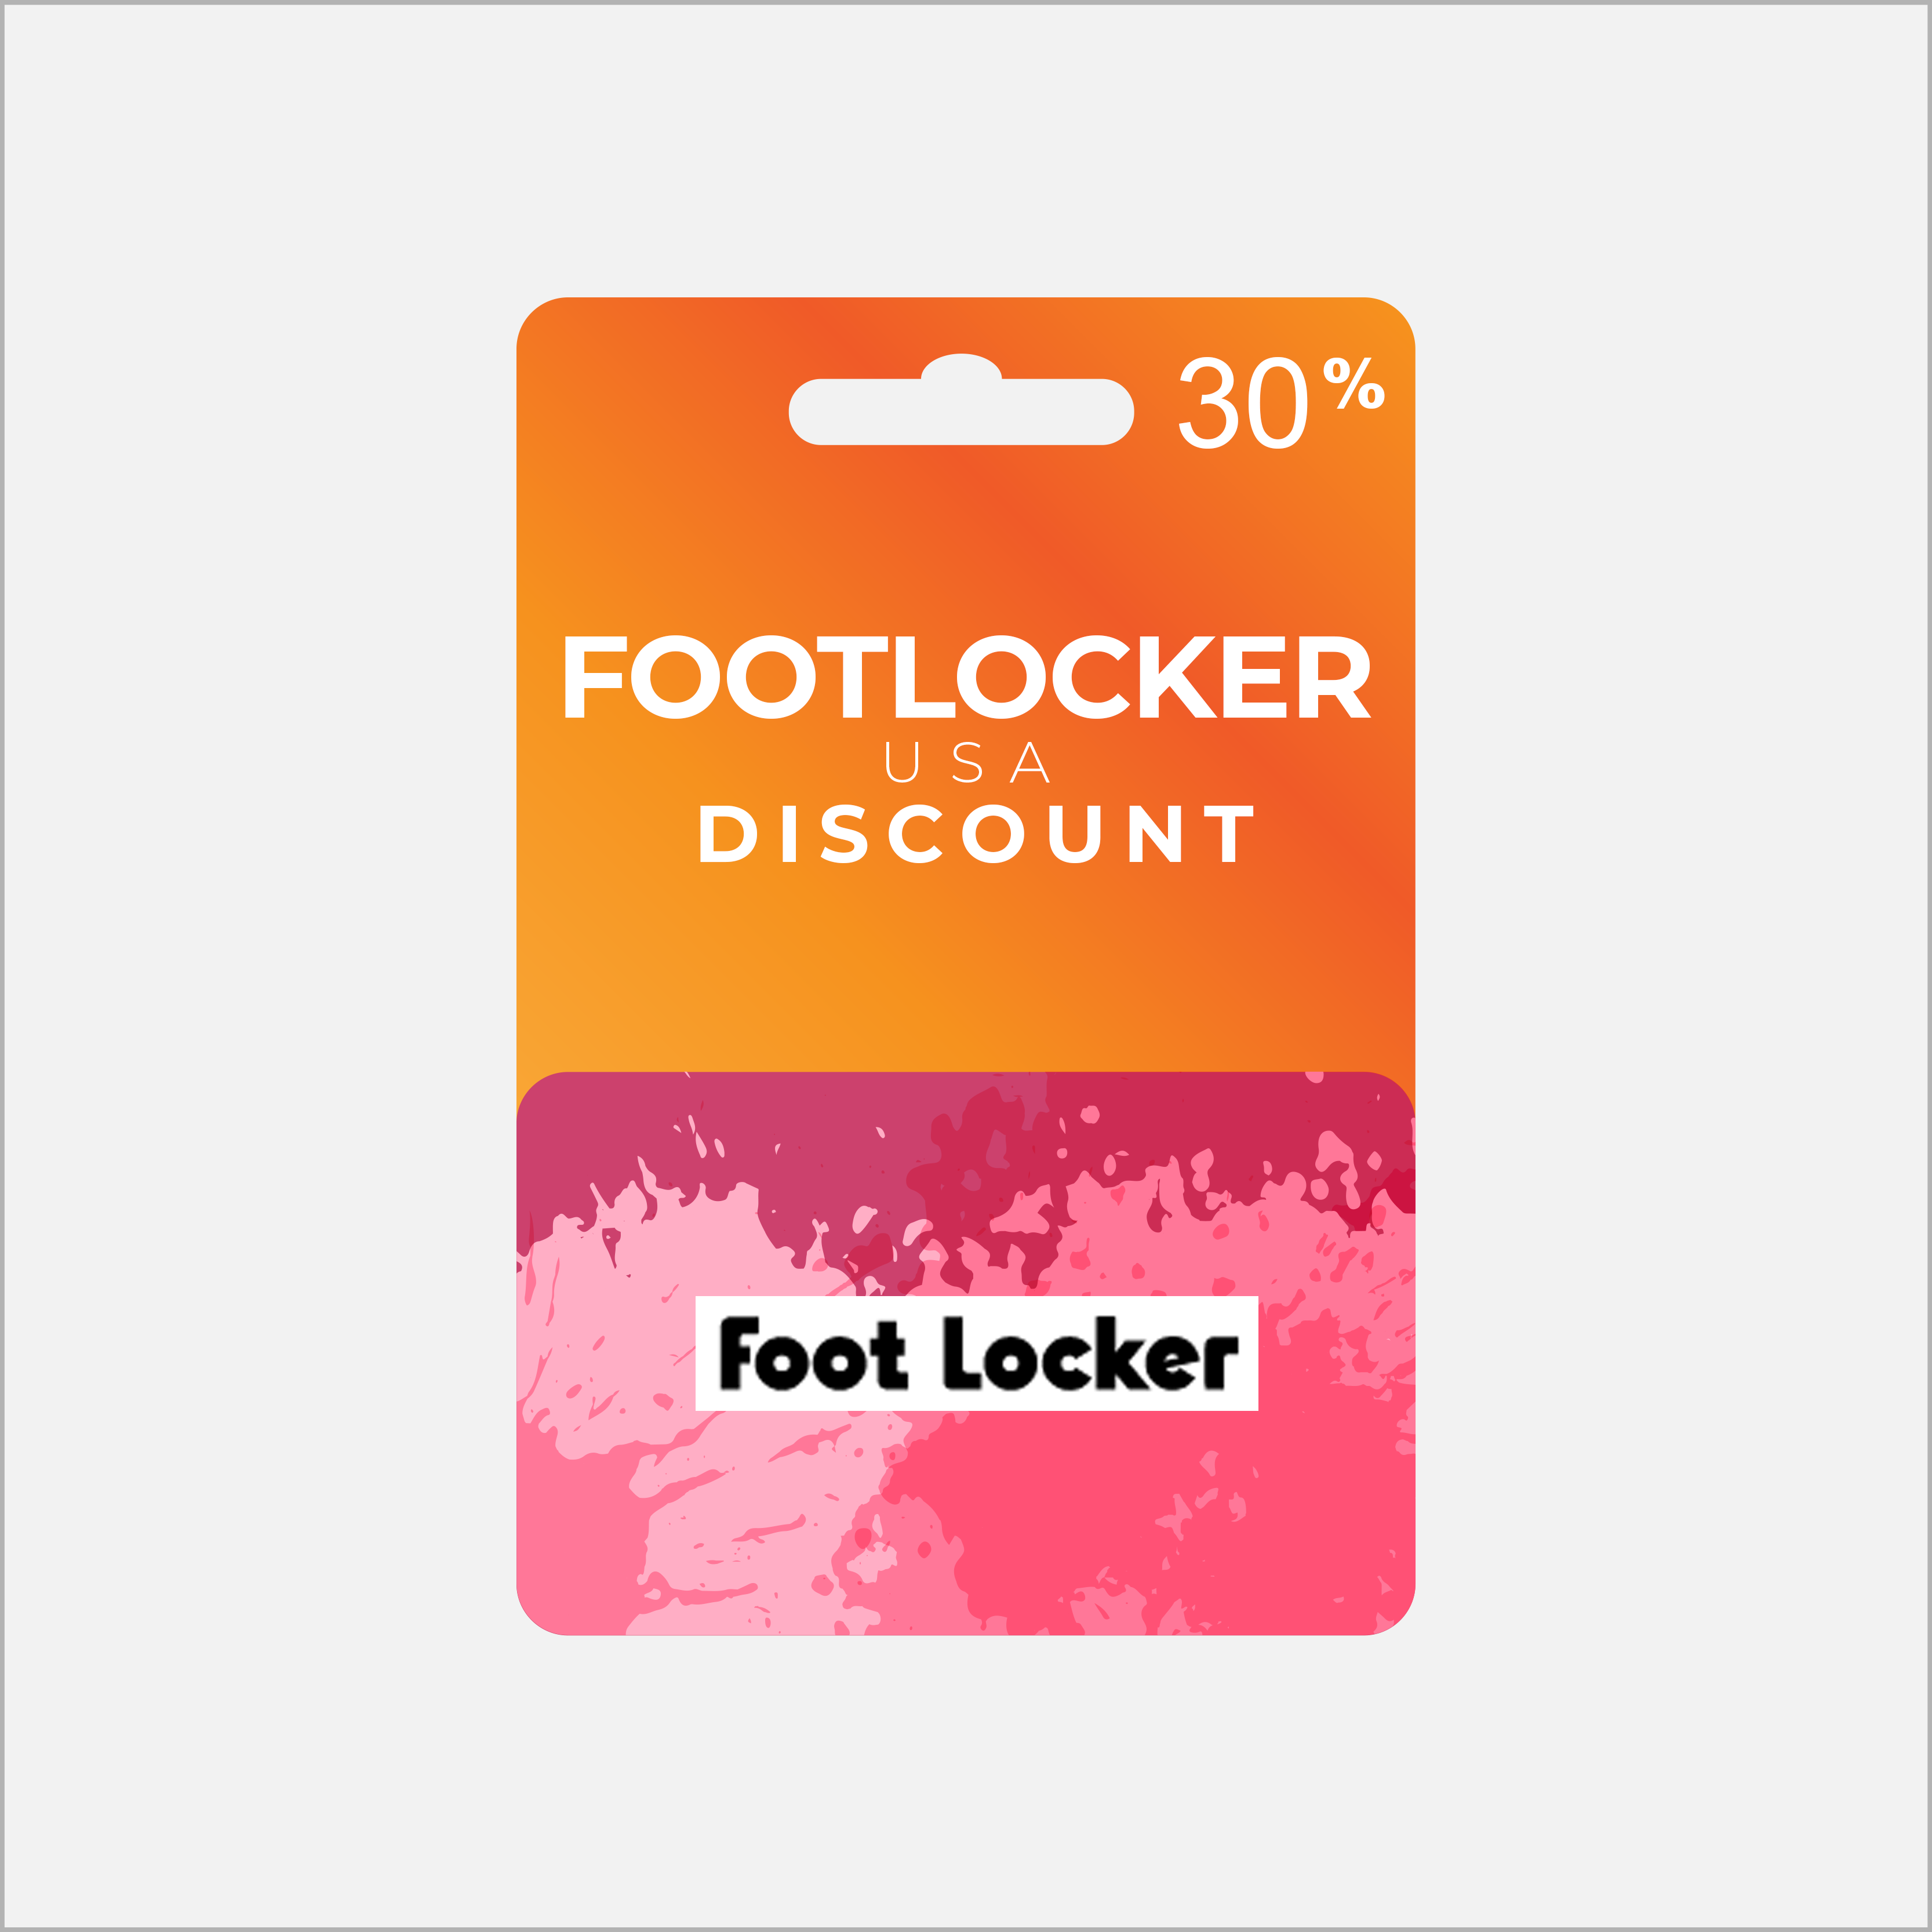 30% Foot Locker Discount Code for USA 